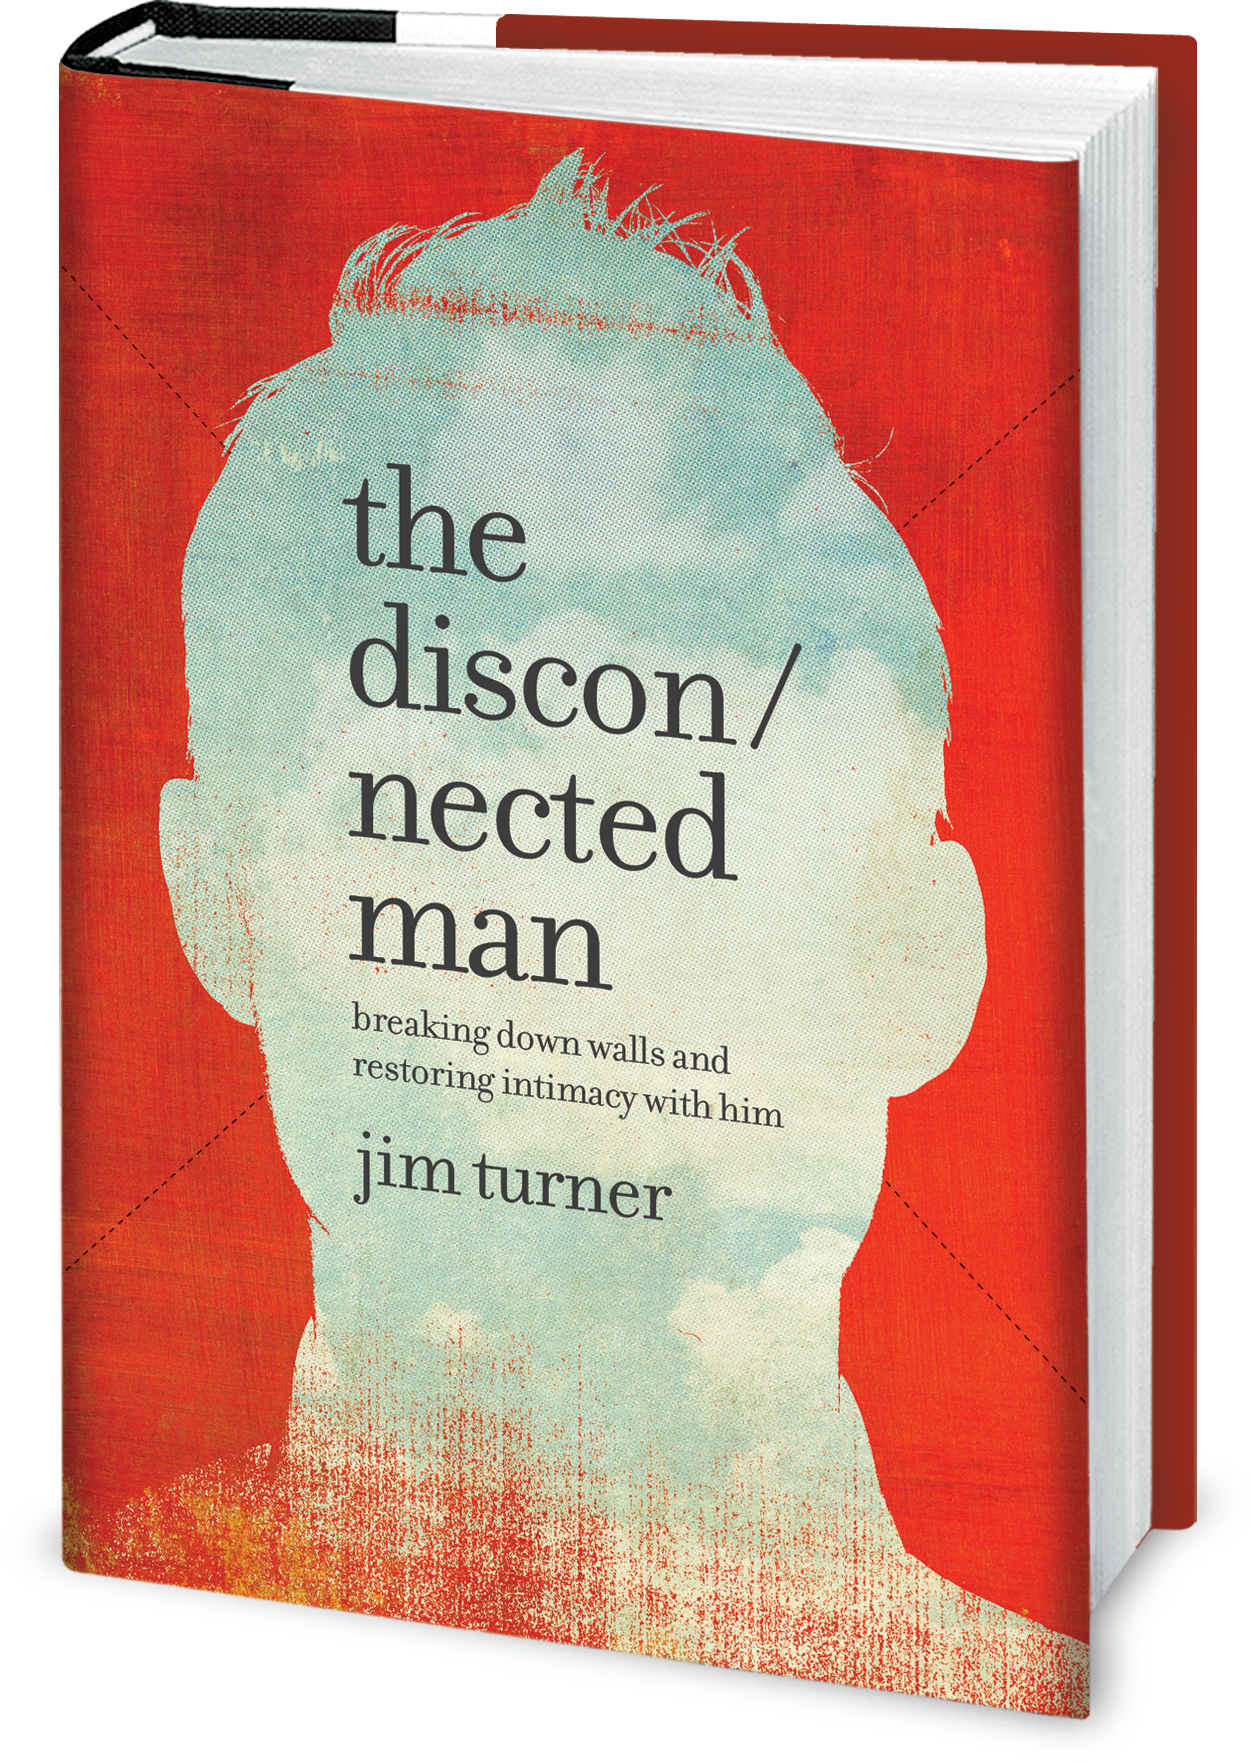 Personalized, Autographed Copy of The Disconnected Man: Breaking Down Walls and Restoring Intimacy With Him